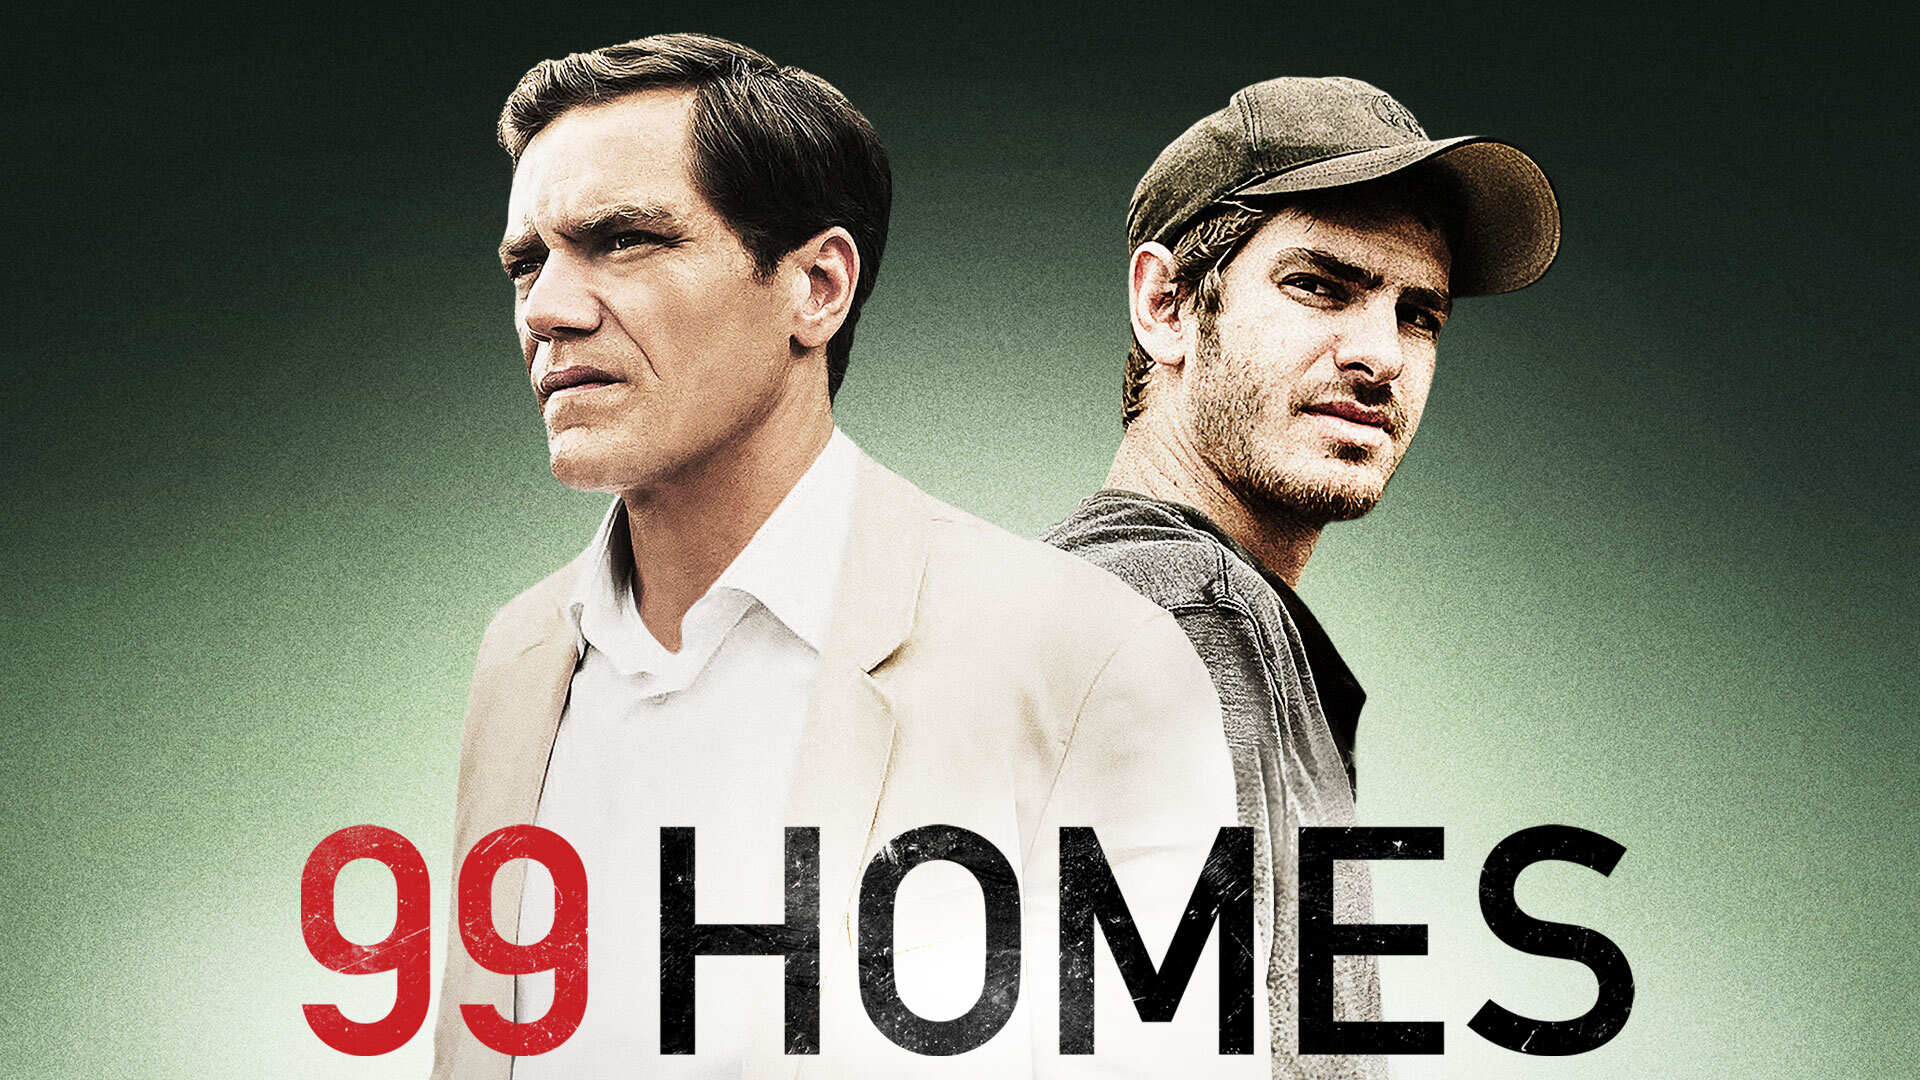 31-facts-about-the-movie-99-homes